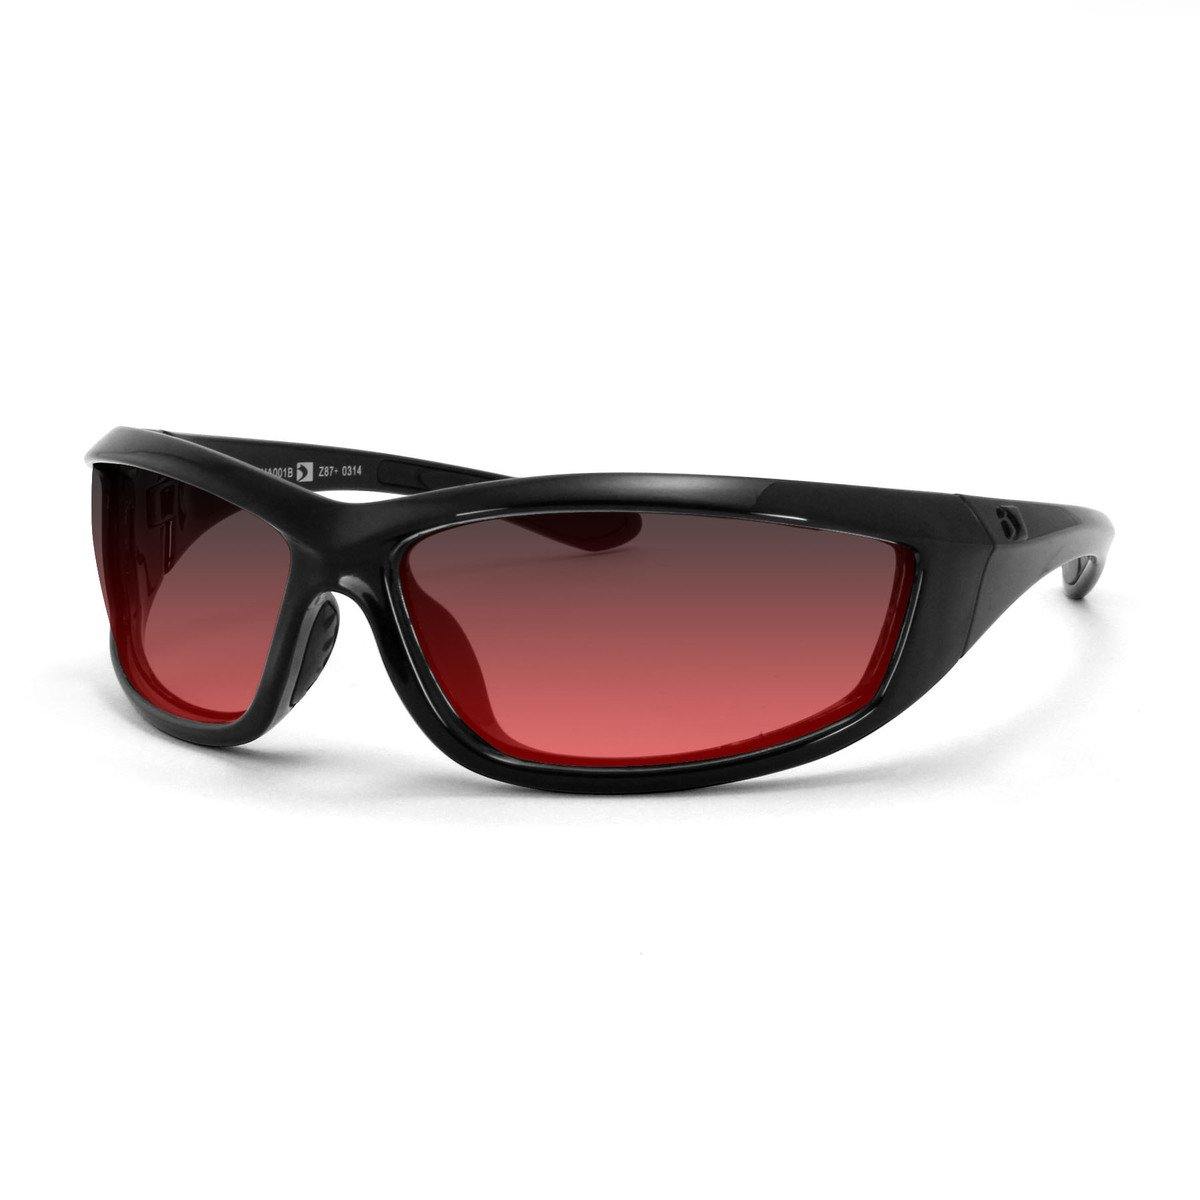 Bobster Charger Sunglasses - American Legend Rider